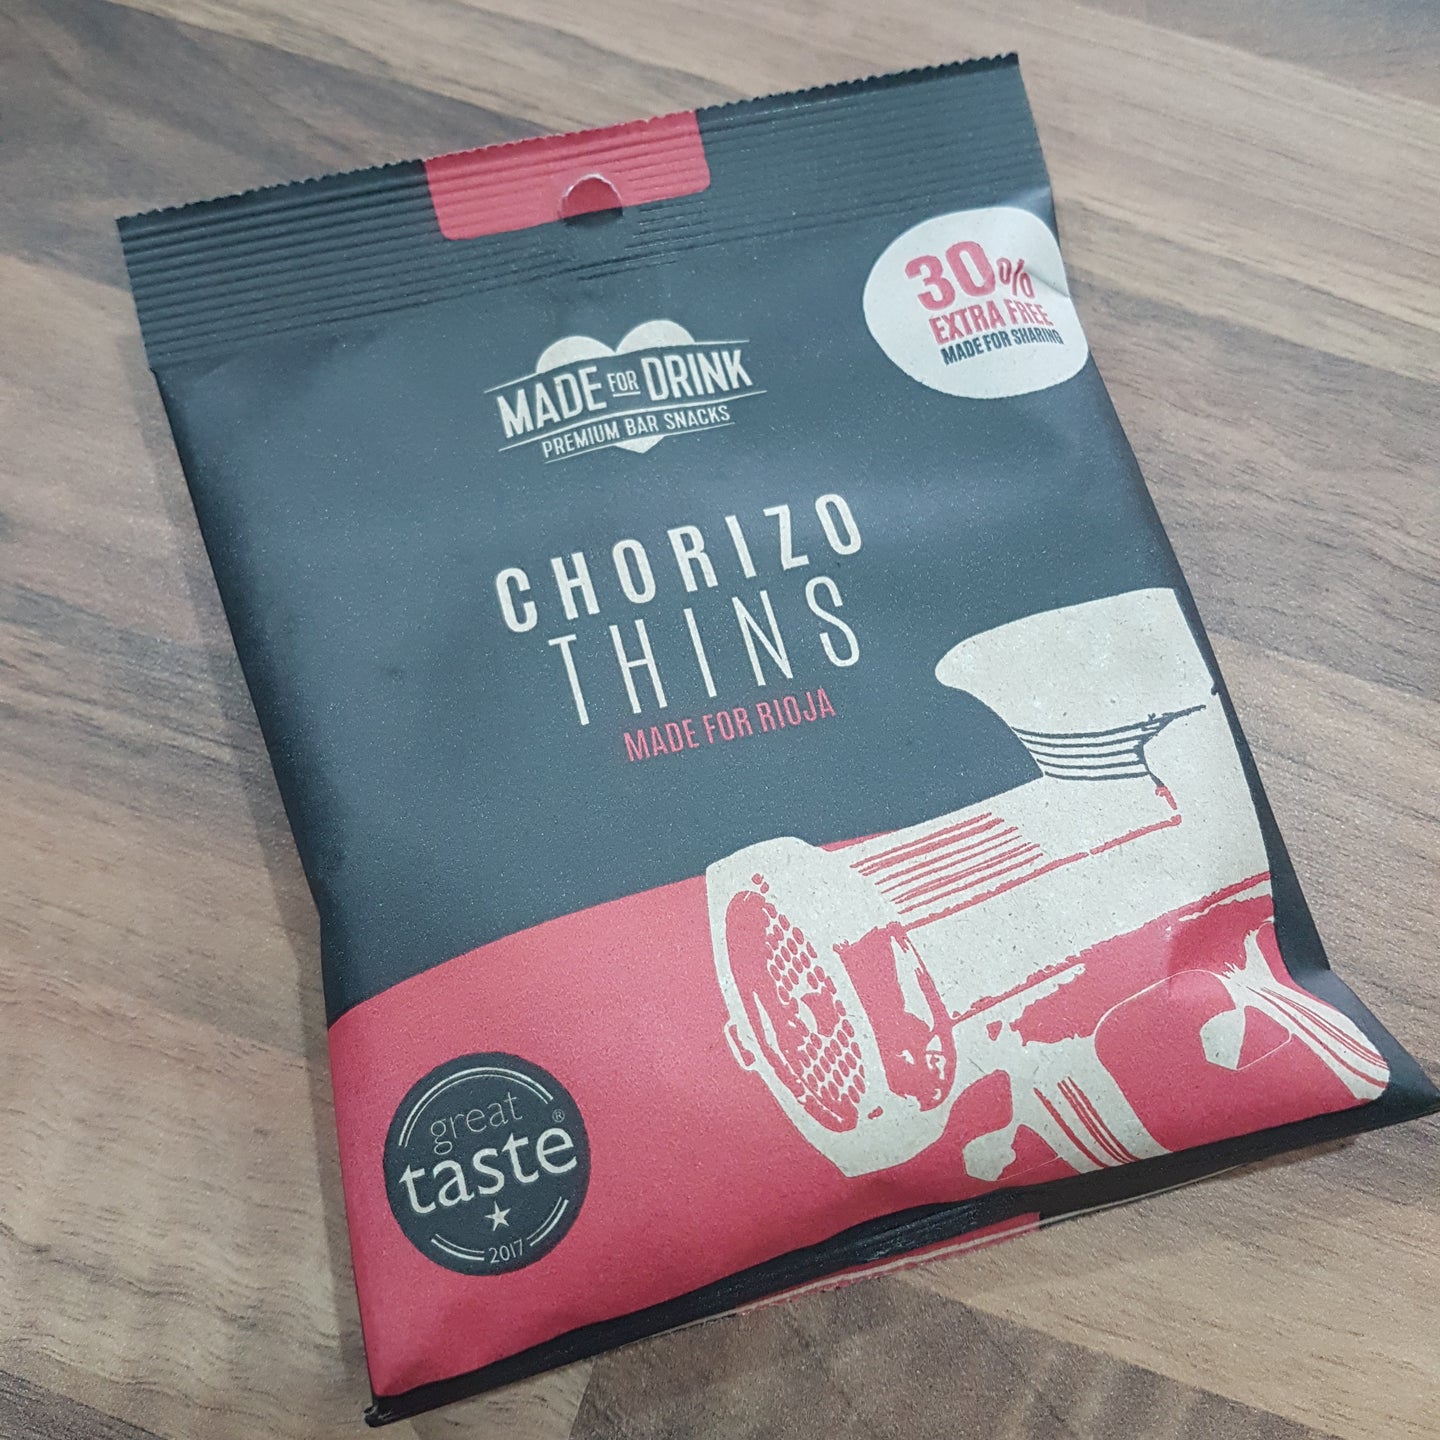 Chorizo Thins - Made for Drink 30g